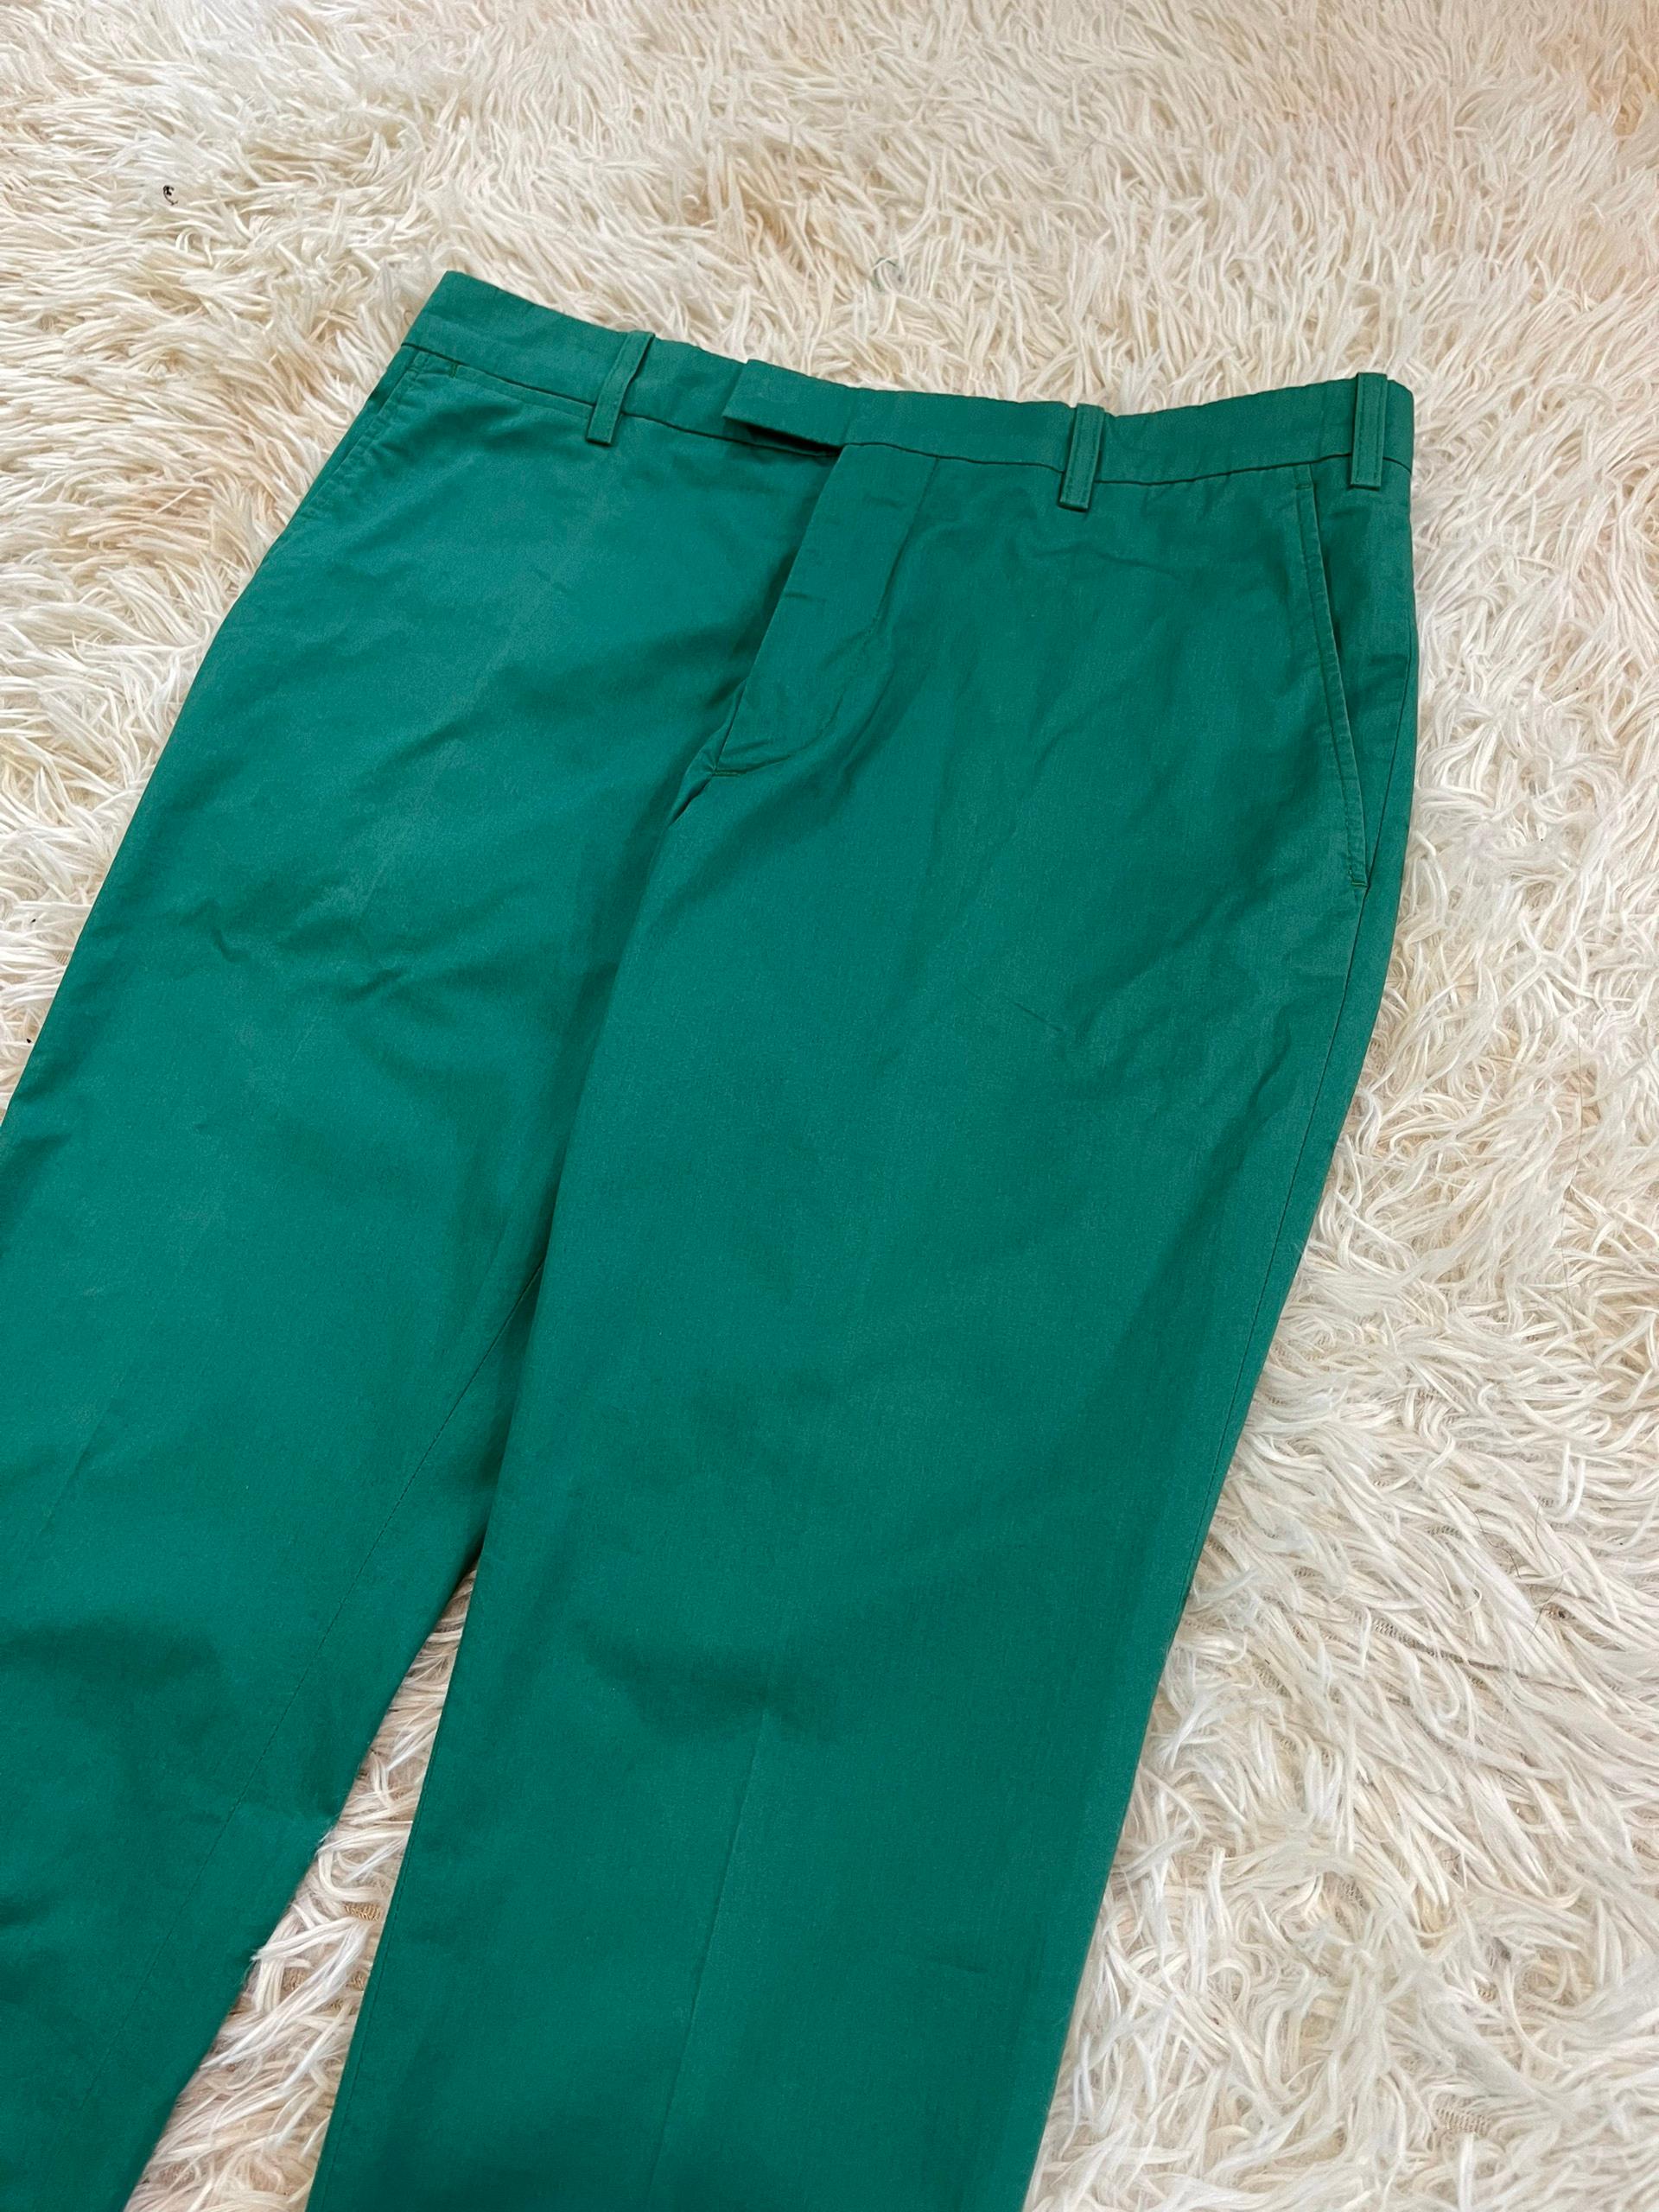 

Fabric: Cotton

Lining: Wool

Season: 2009

Pocket: Front x 2.

Weight: 200g

Color: Green

Defects: None
